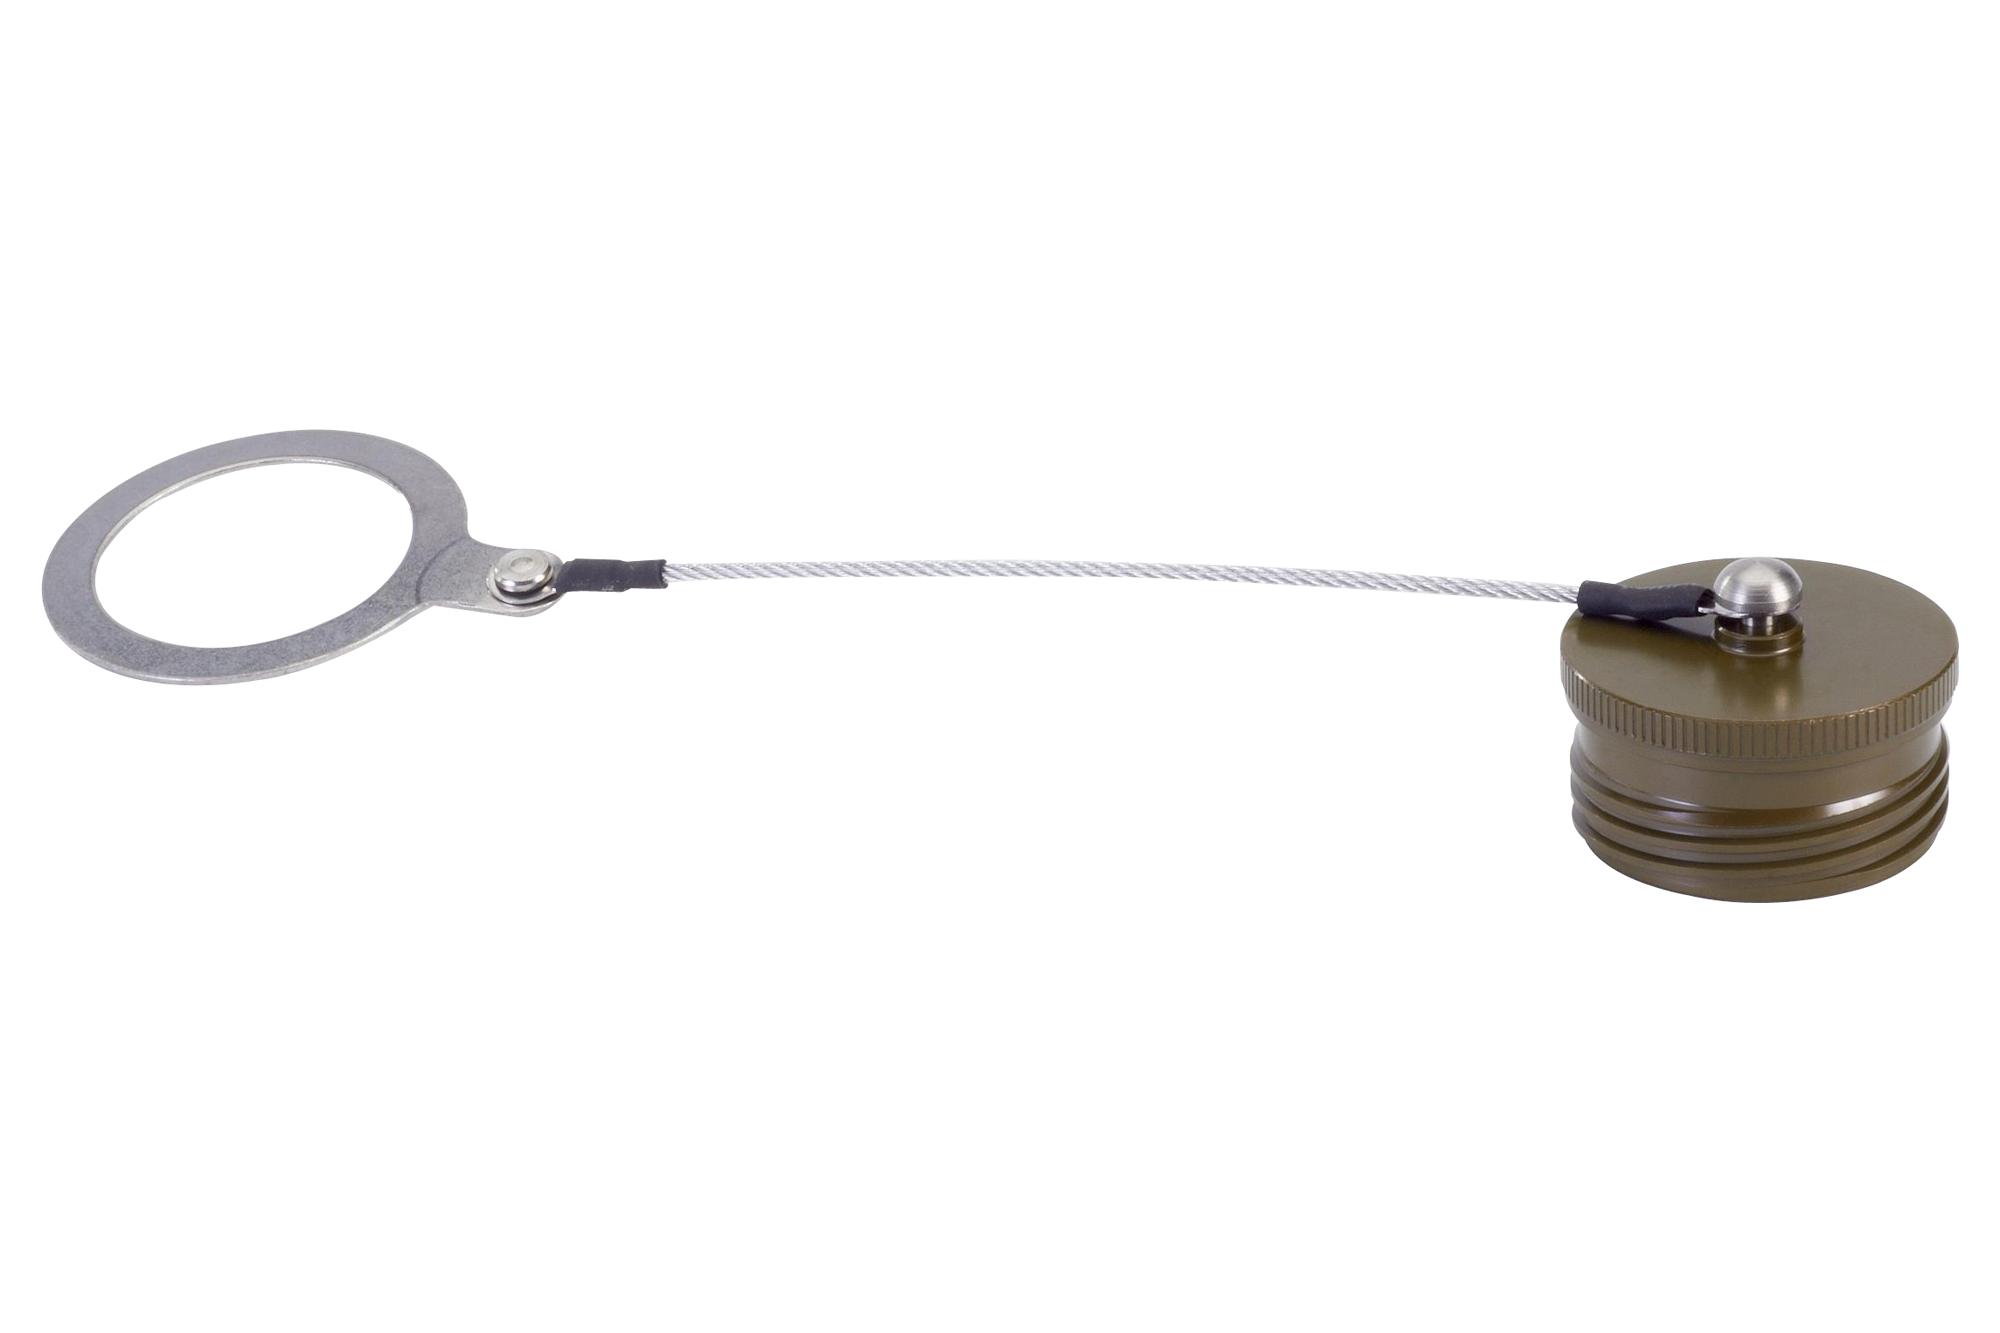 Amphenol Pcd D38999/32W9N Dust Cap W/rope And Ring, Size 9